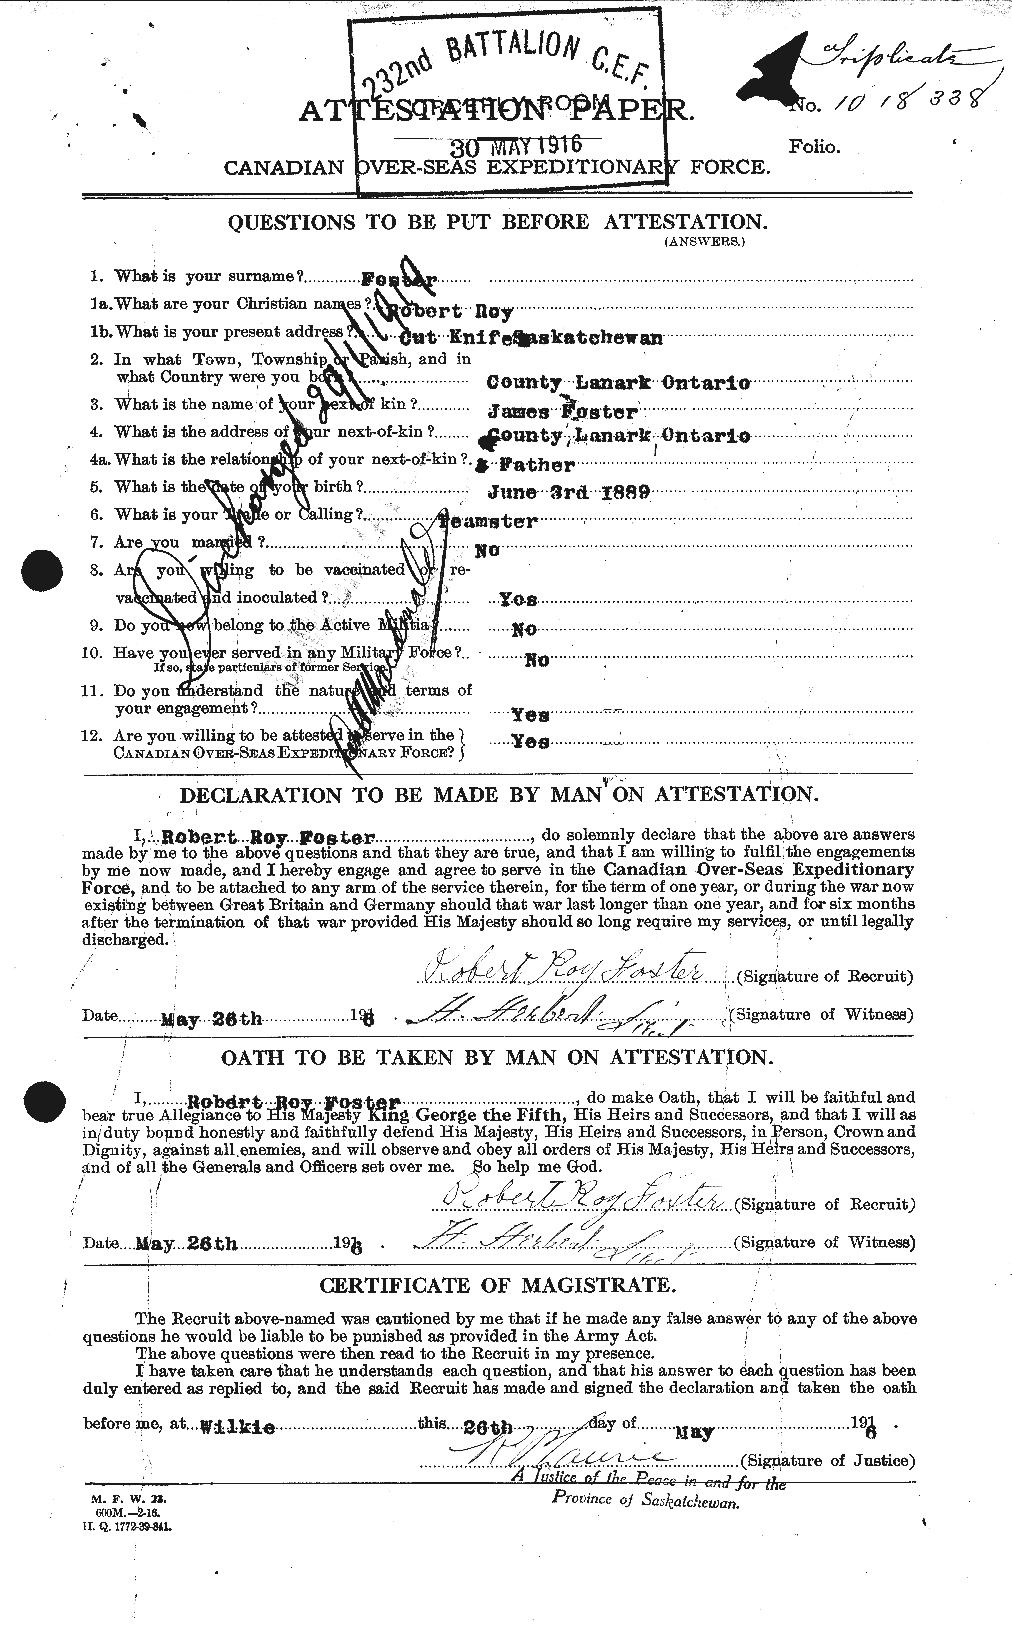 Personnel Records of the First World War - CEF 335185a